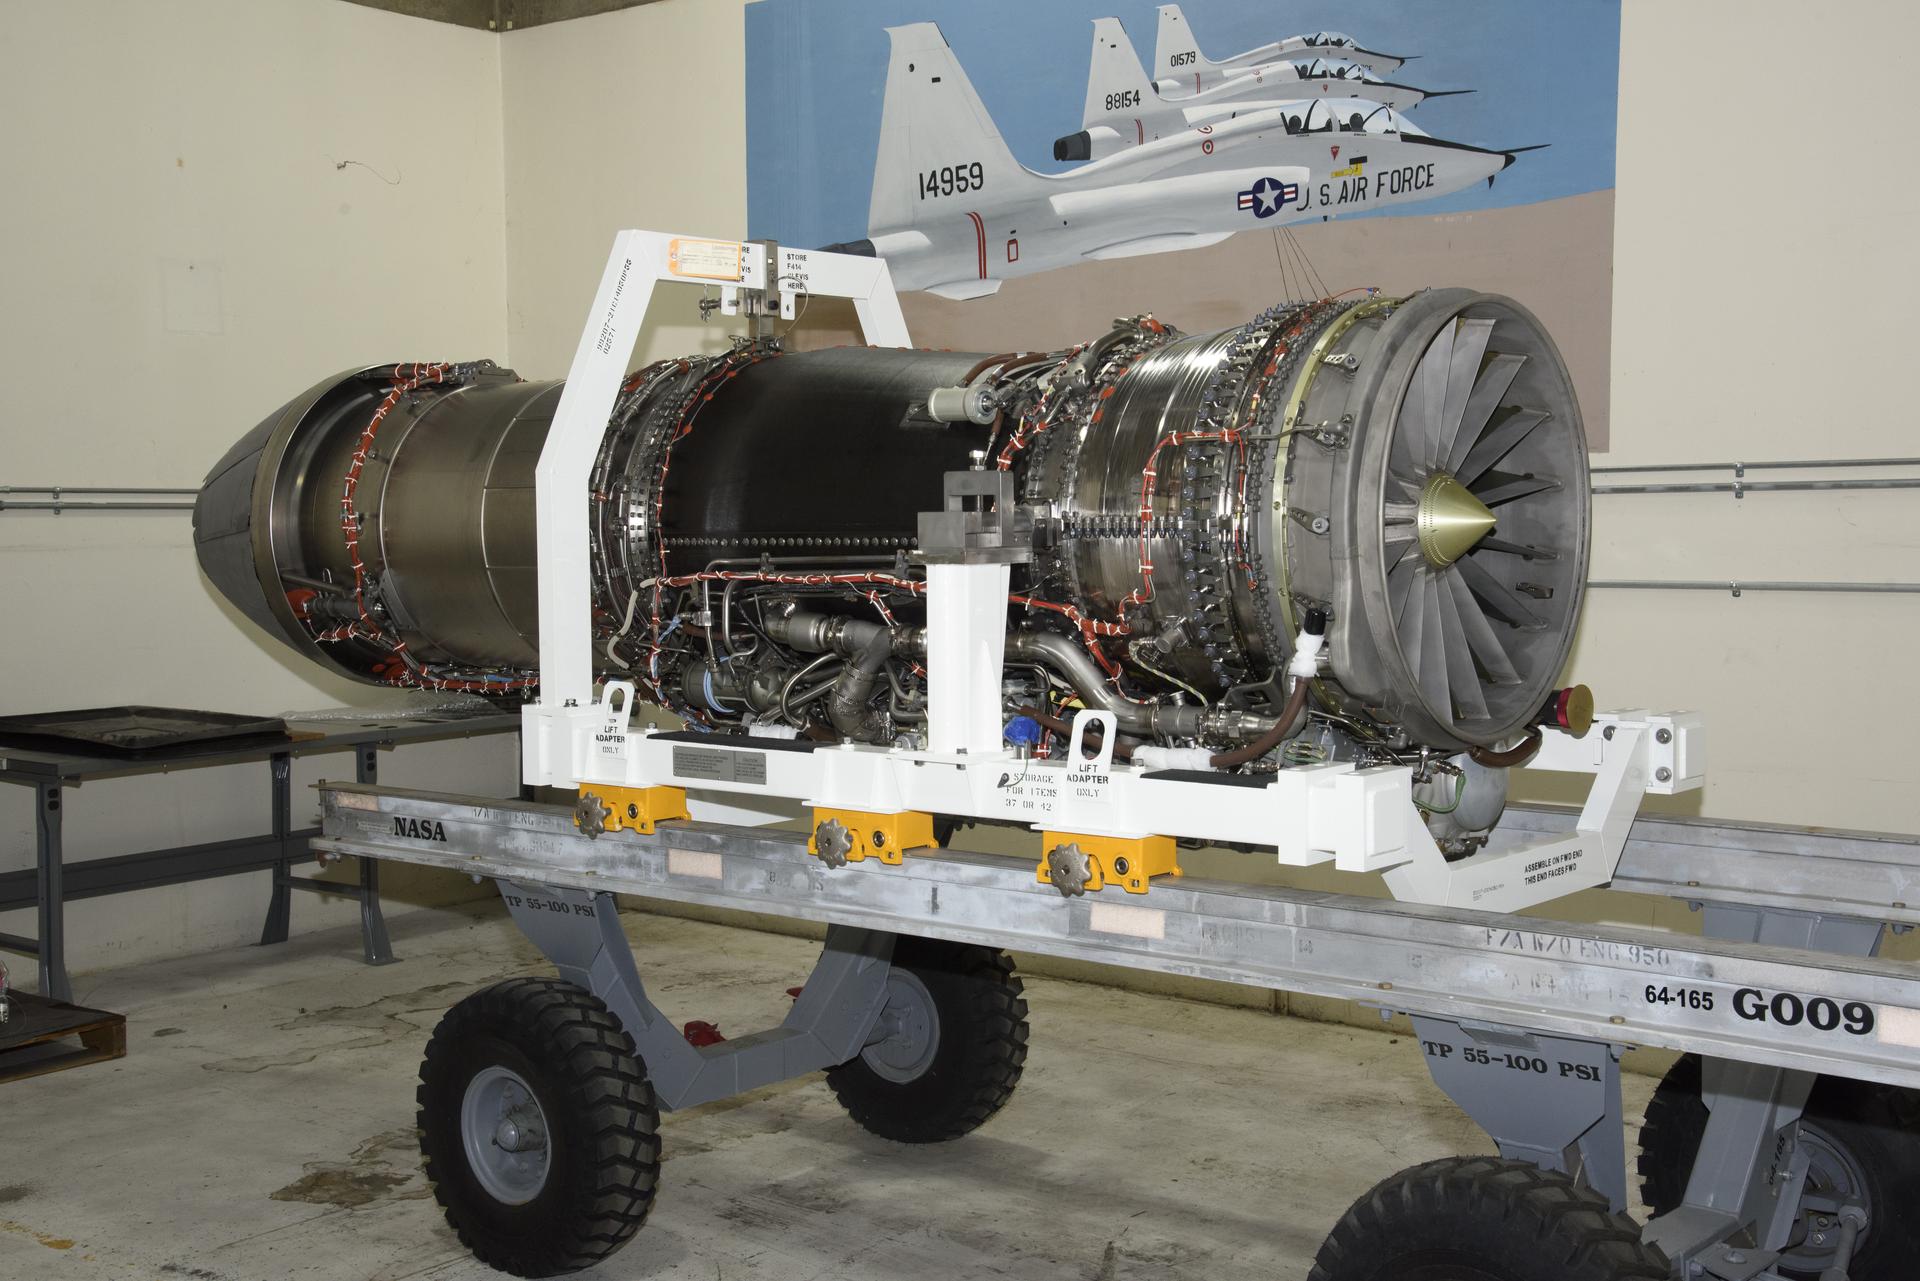 A large aircraft engine sits on a transport dolly in a storage facility.